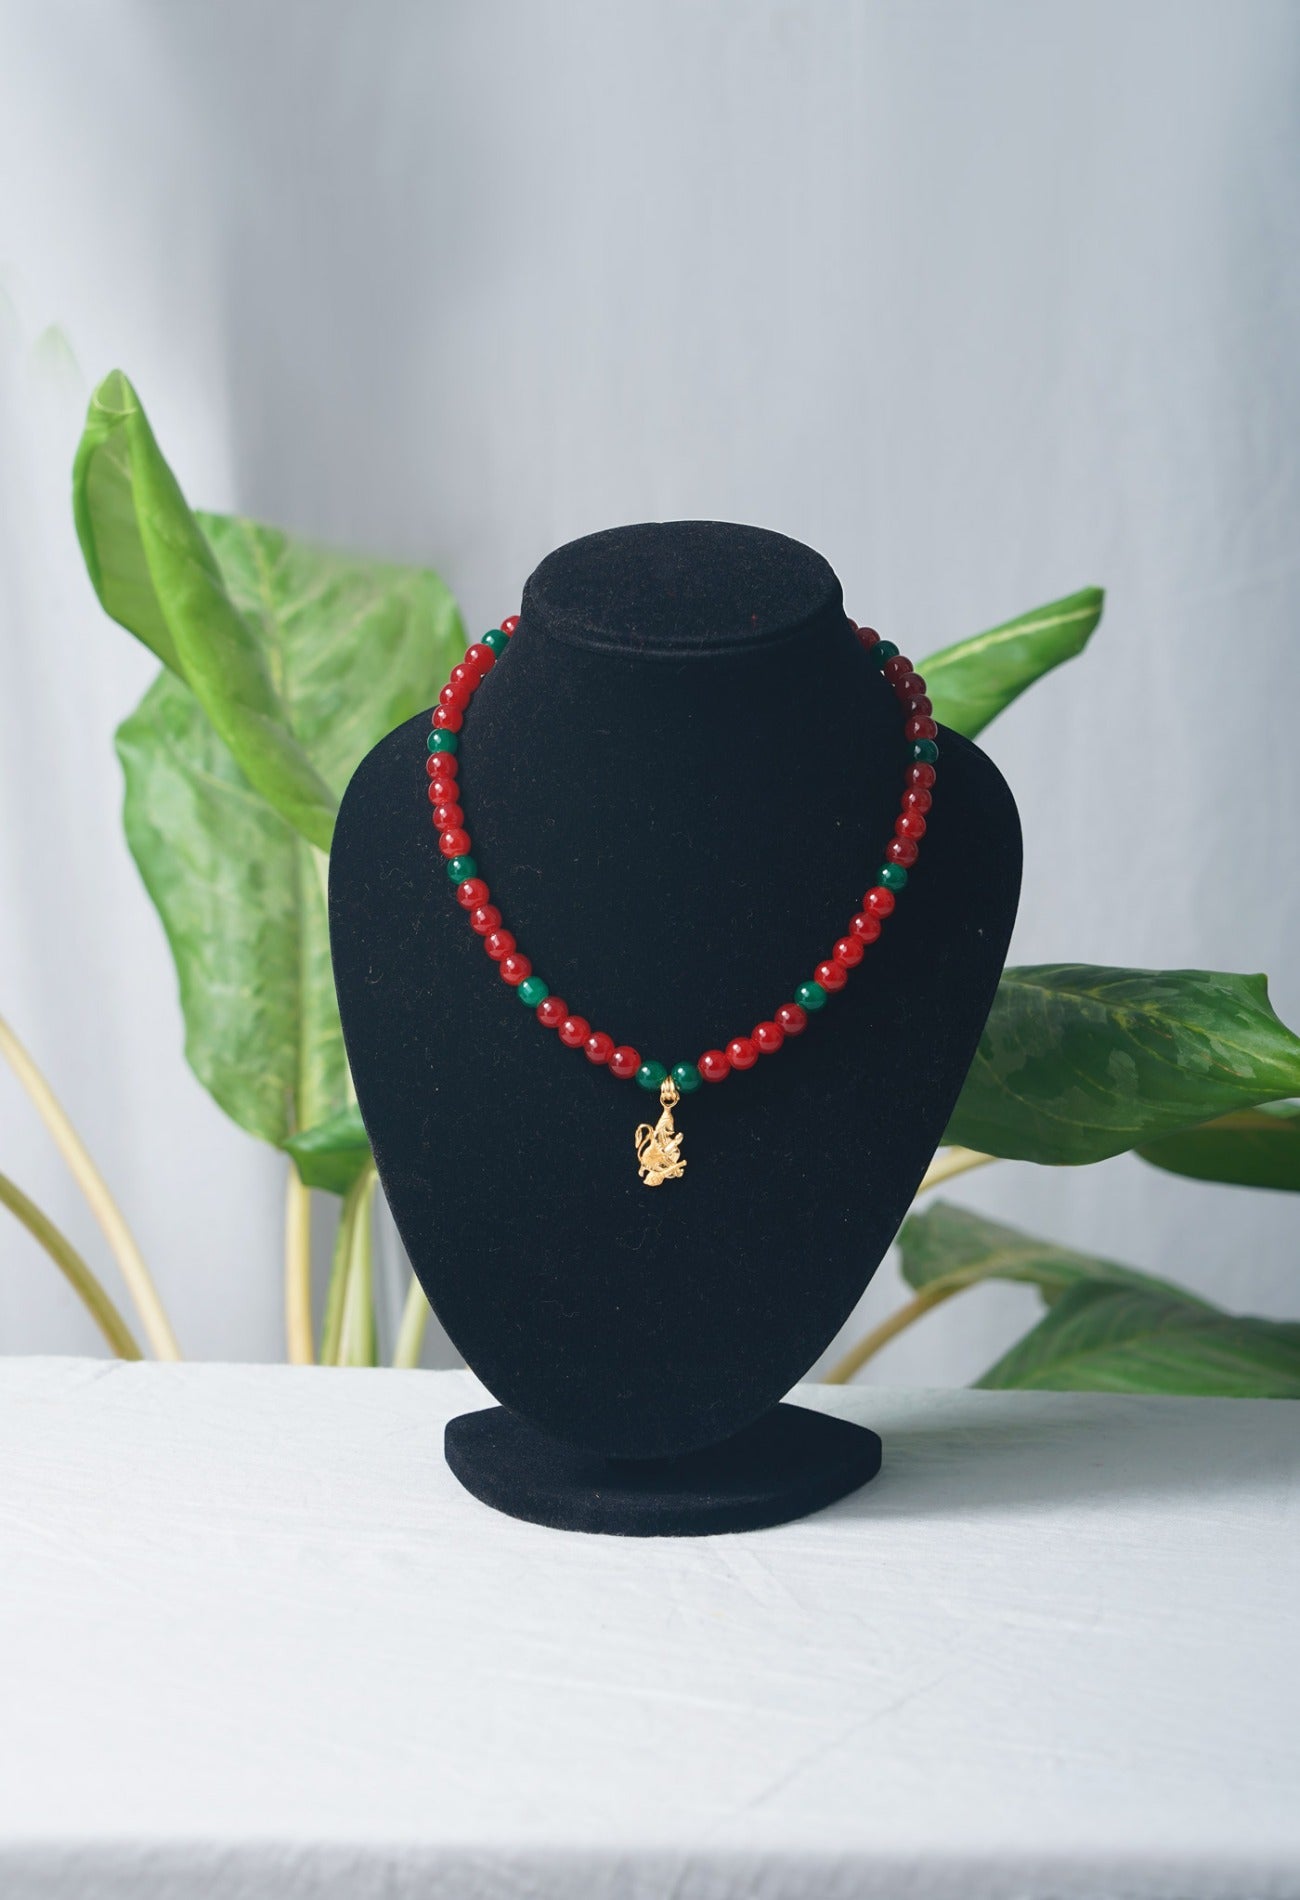 Online Shopping for Red and Green Amravati Round Beads Necklace with Pendent with jewellery from Andhra pradesh at Unnatisilks.com India
